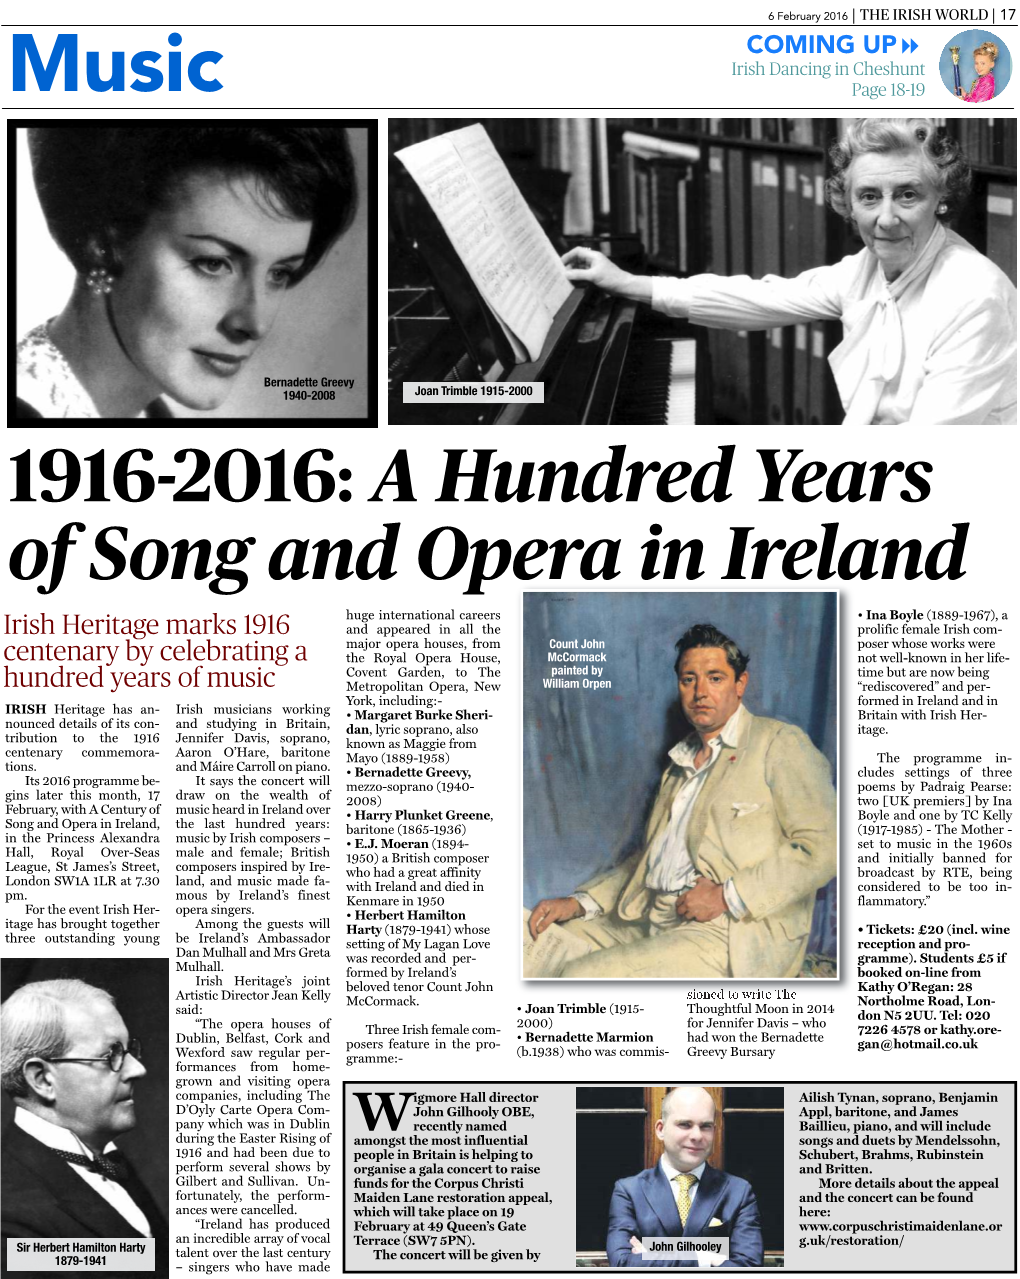 1916-2016: a Hundred Years of Song and Opera in Ireland